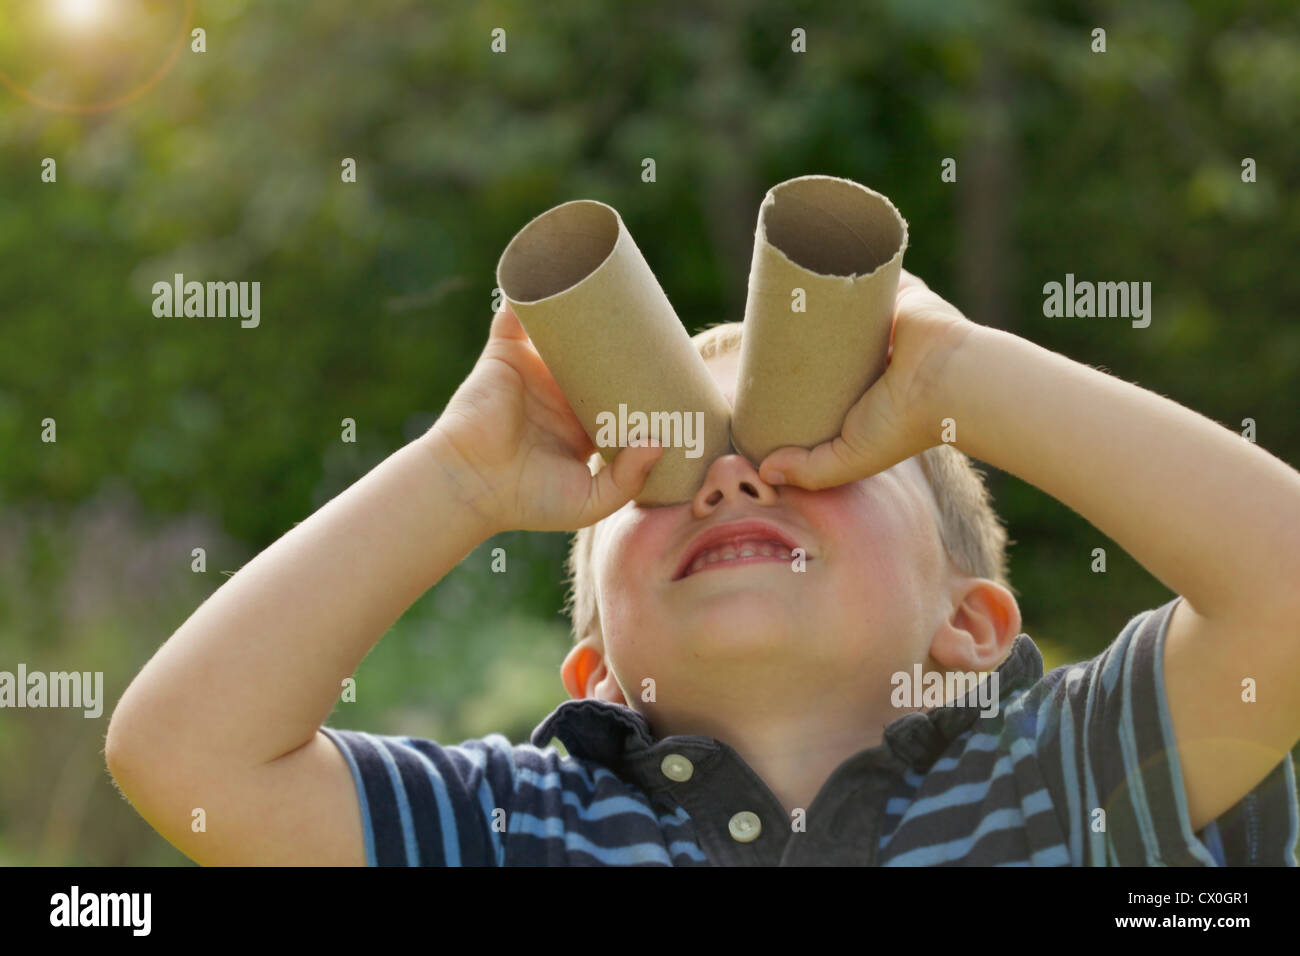 Young Boy Looking Through Empty Toilet Paper Rolls Stock Photo